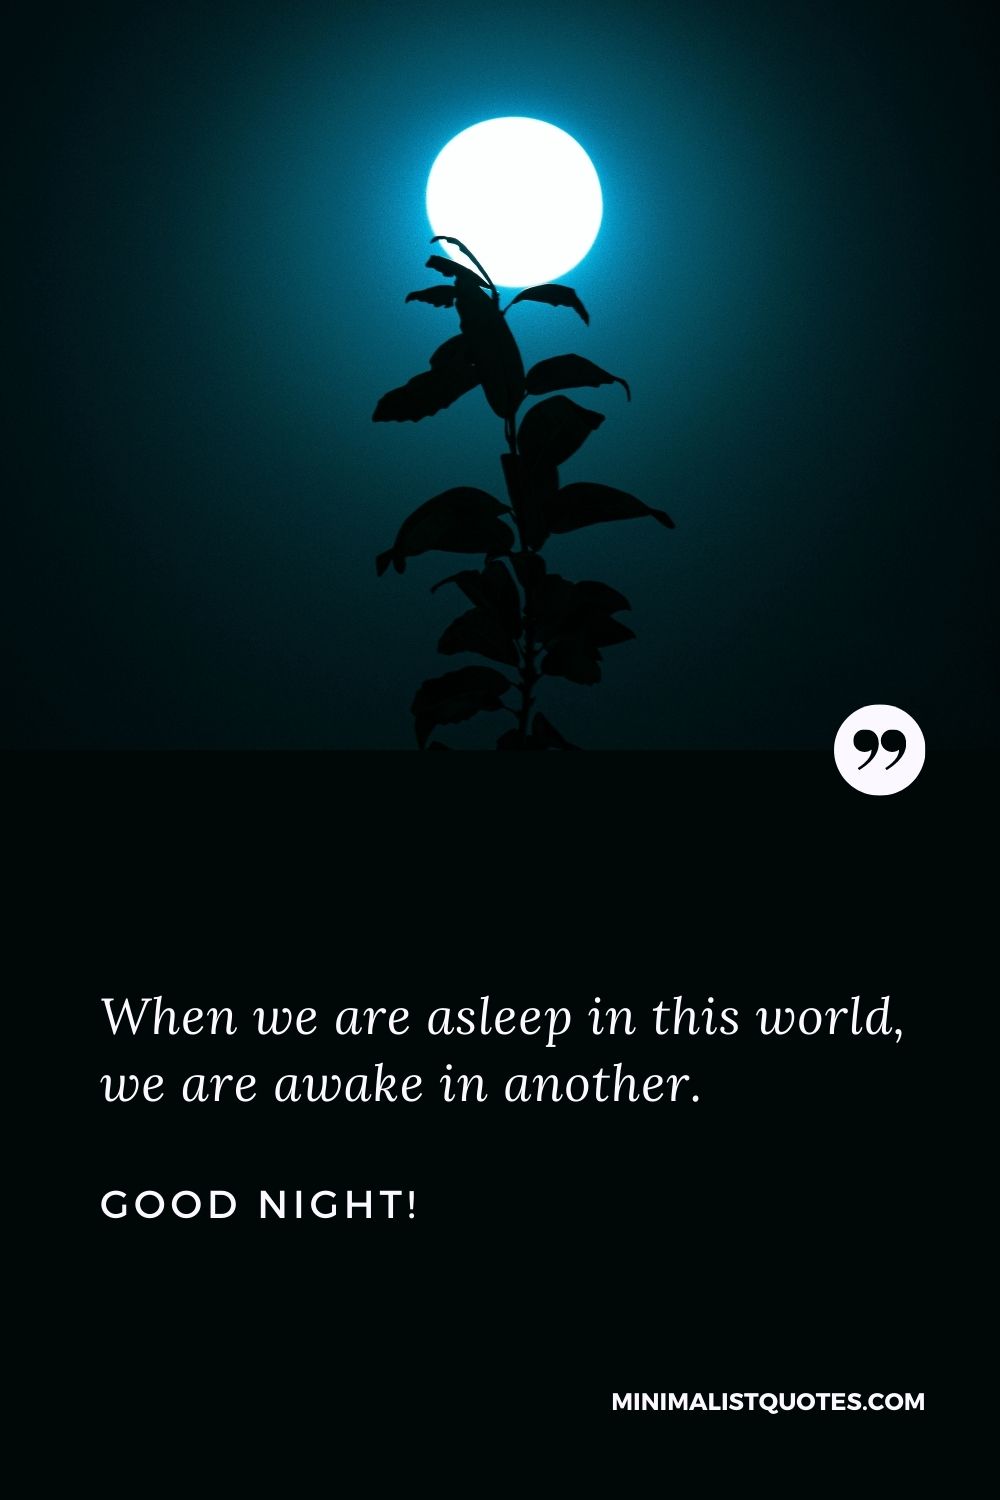 Good Night Wish & Message With HD Image: When we are asleep in this world, we are awake in another.